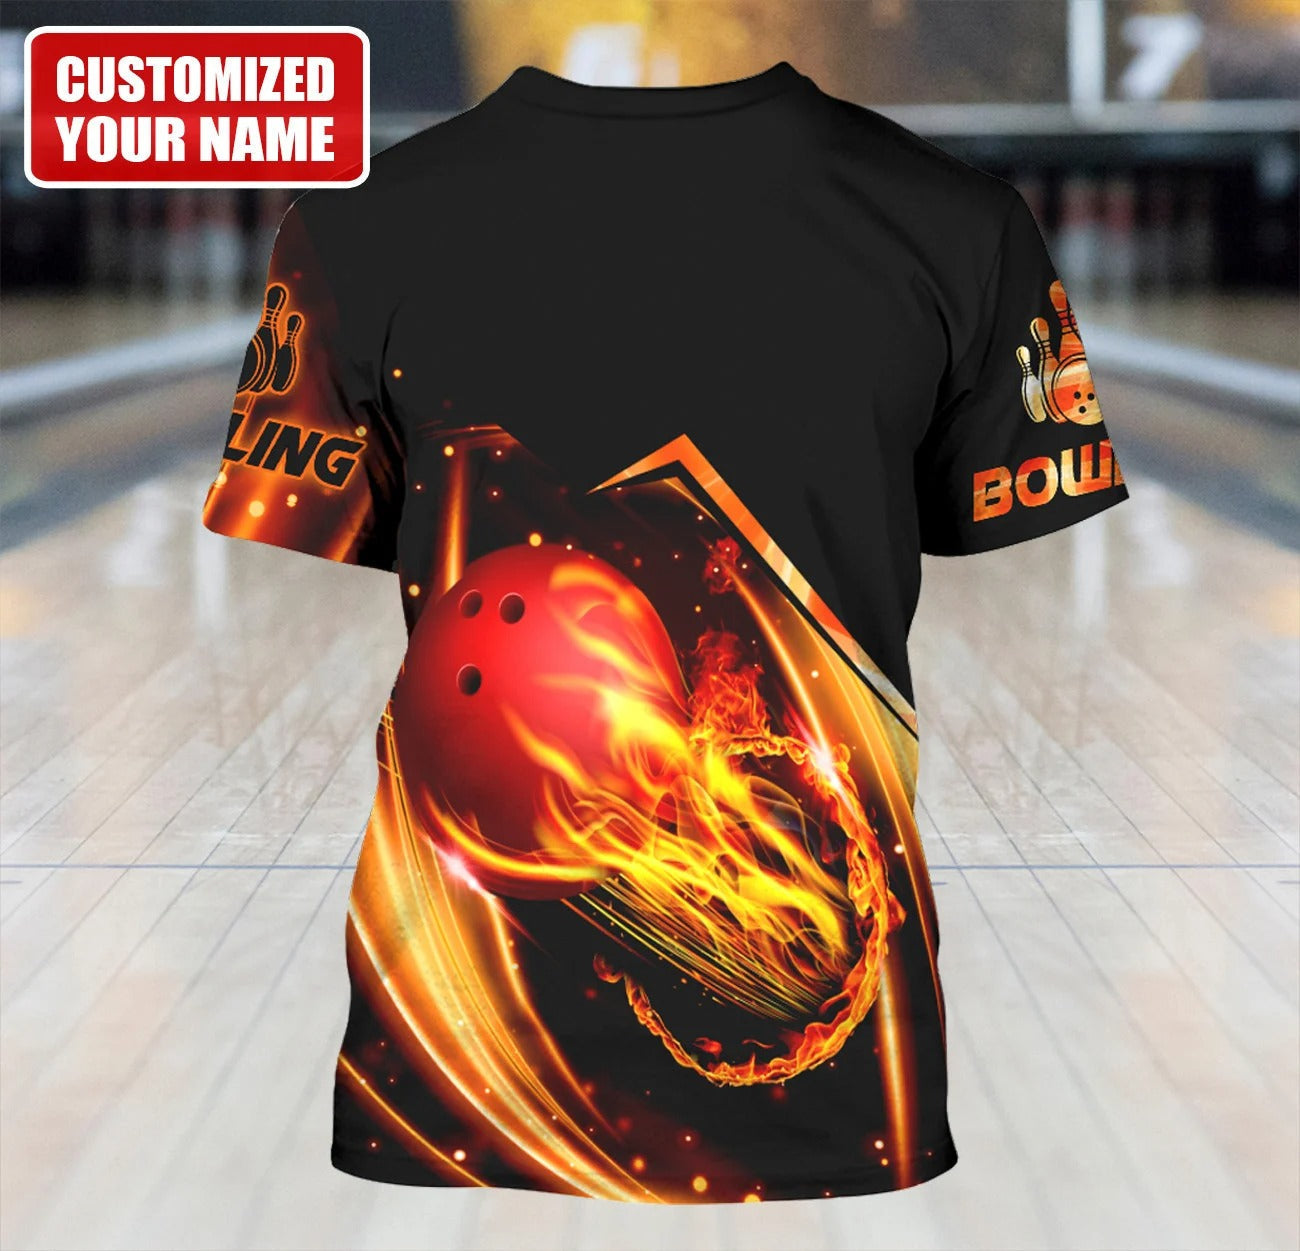 Personalized With Name Fire Bowling 3D T Shirt Cool Shirt For Bowling Team Players